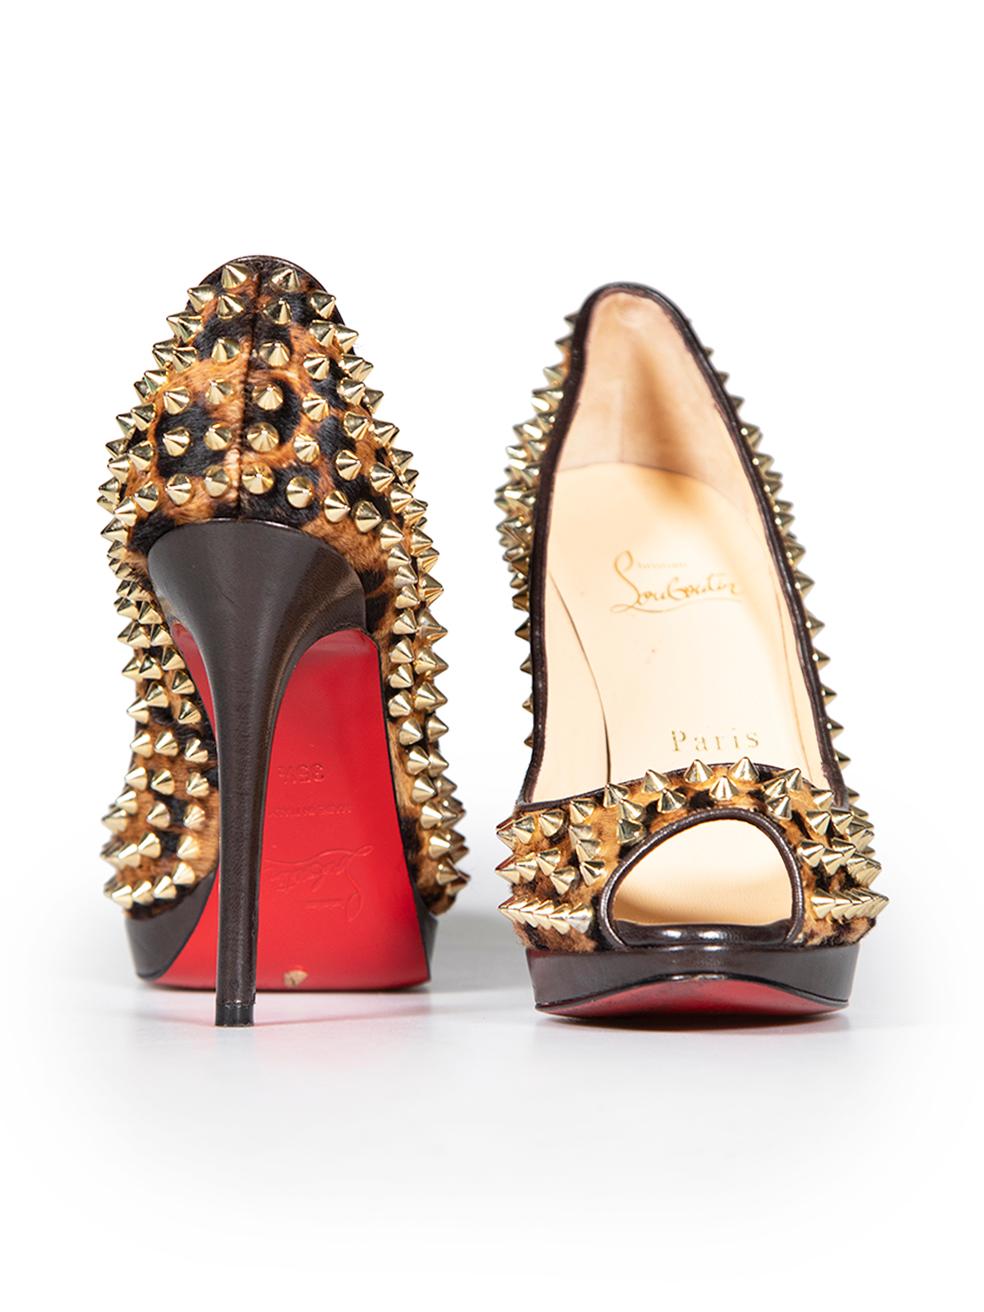 Christian Louboutin Gold Ponyhair Yolanda Stud Heels Size IT 35.5 In Good Condition For Sale In London, GB